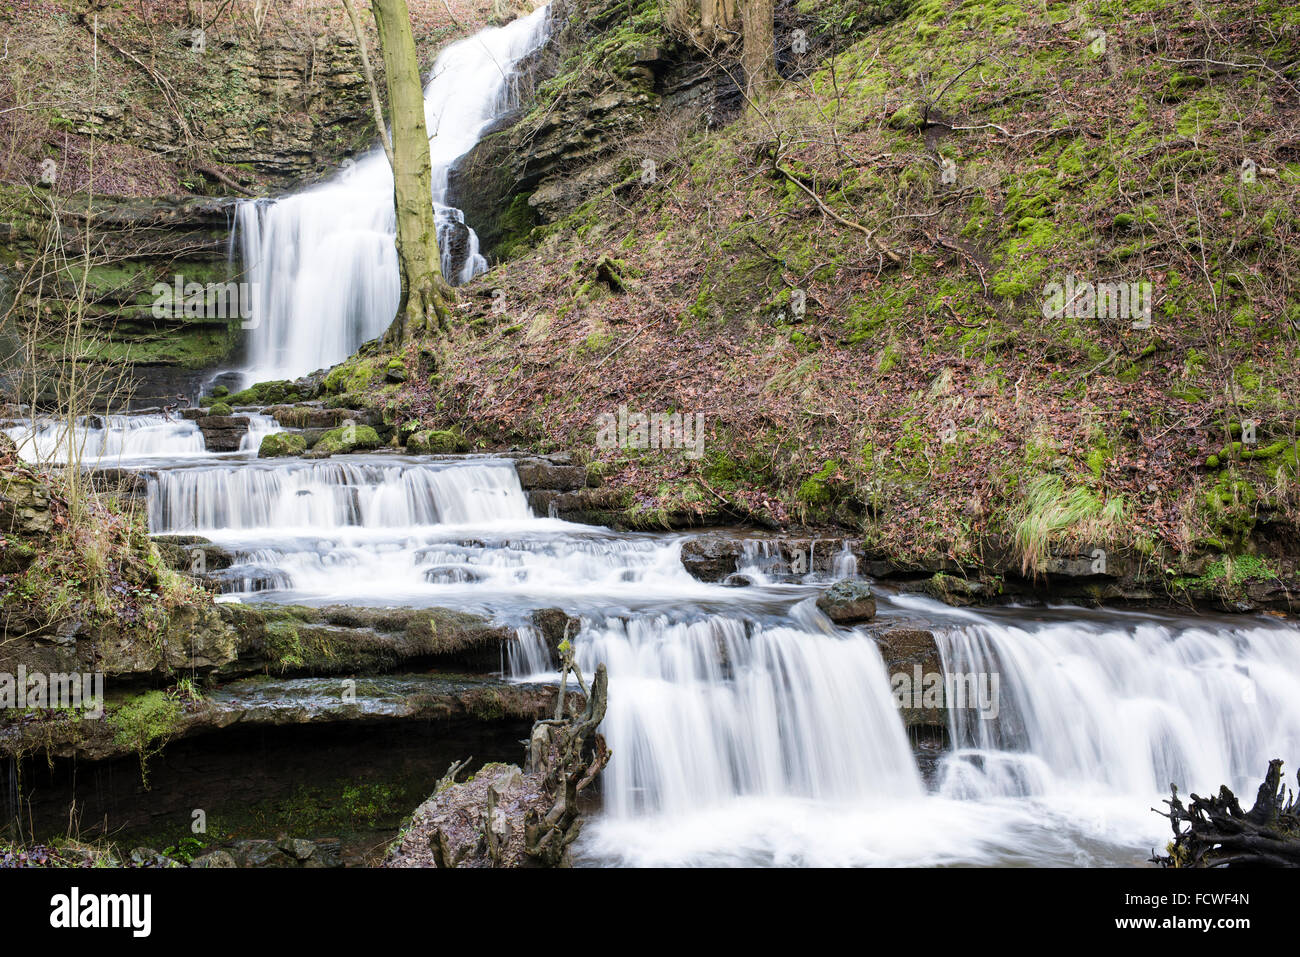 Scaleber Force waterfall in full flow, Settle, Yorkshire Dales National Park, England, UK, January 2016 (2) Stock Photo